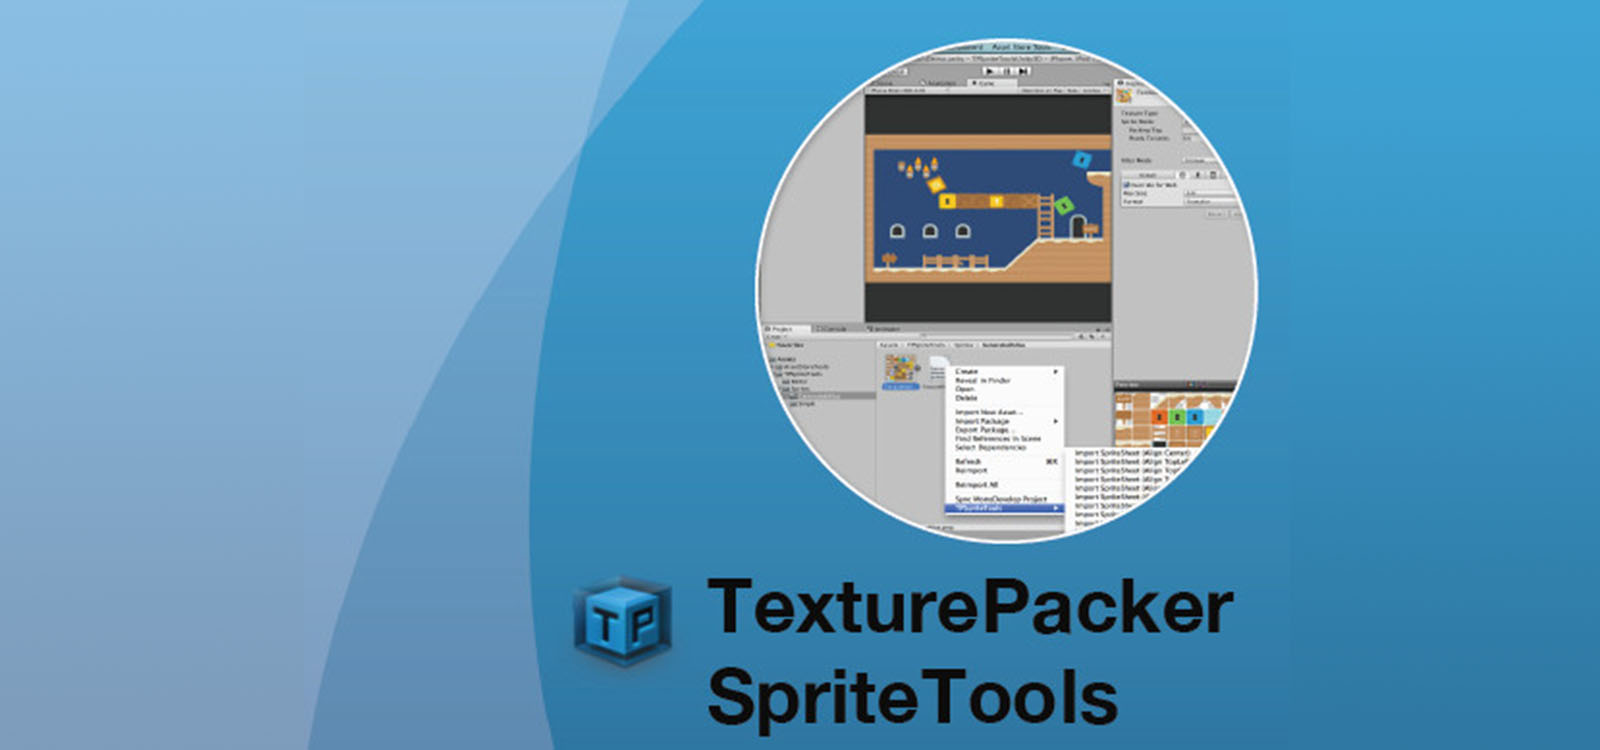 texturepacker sprite settings are greyed out